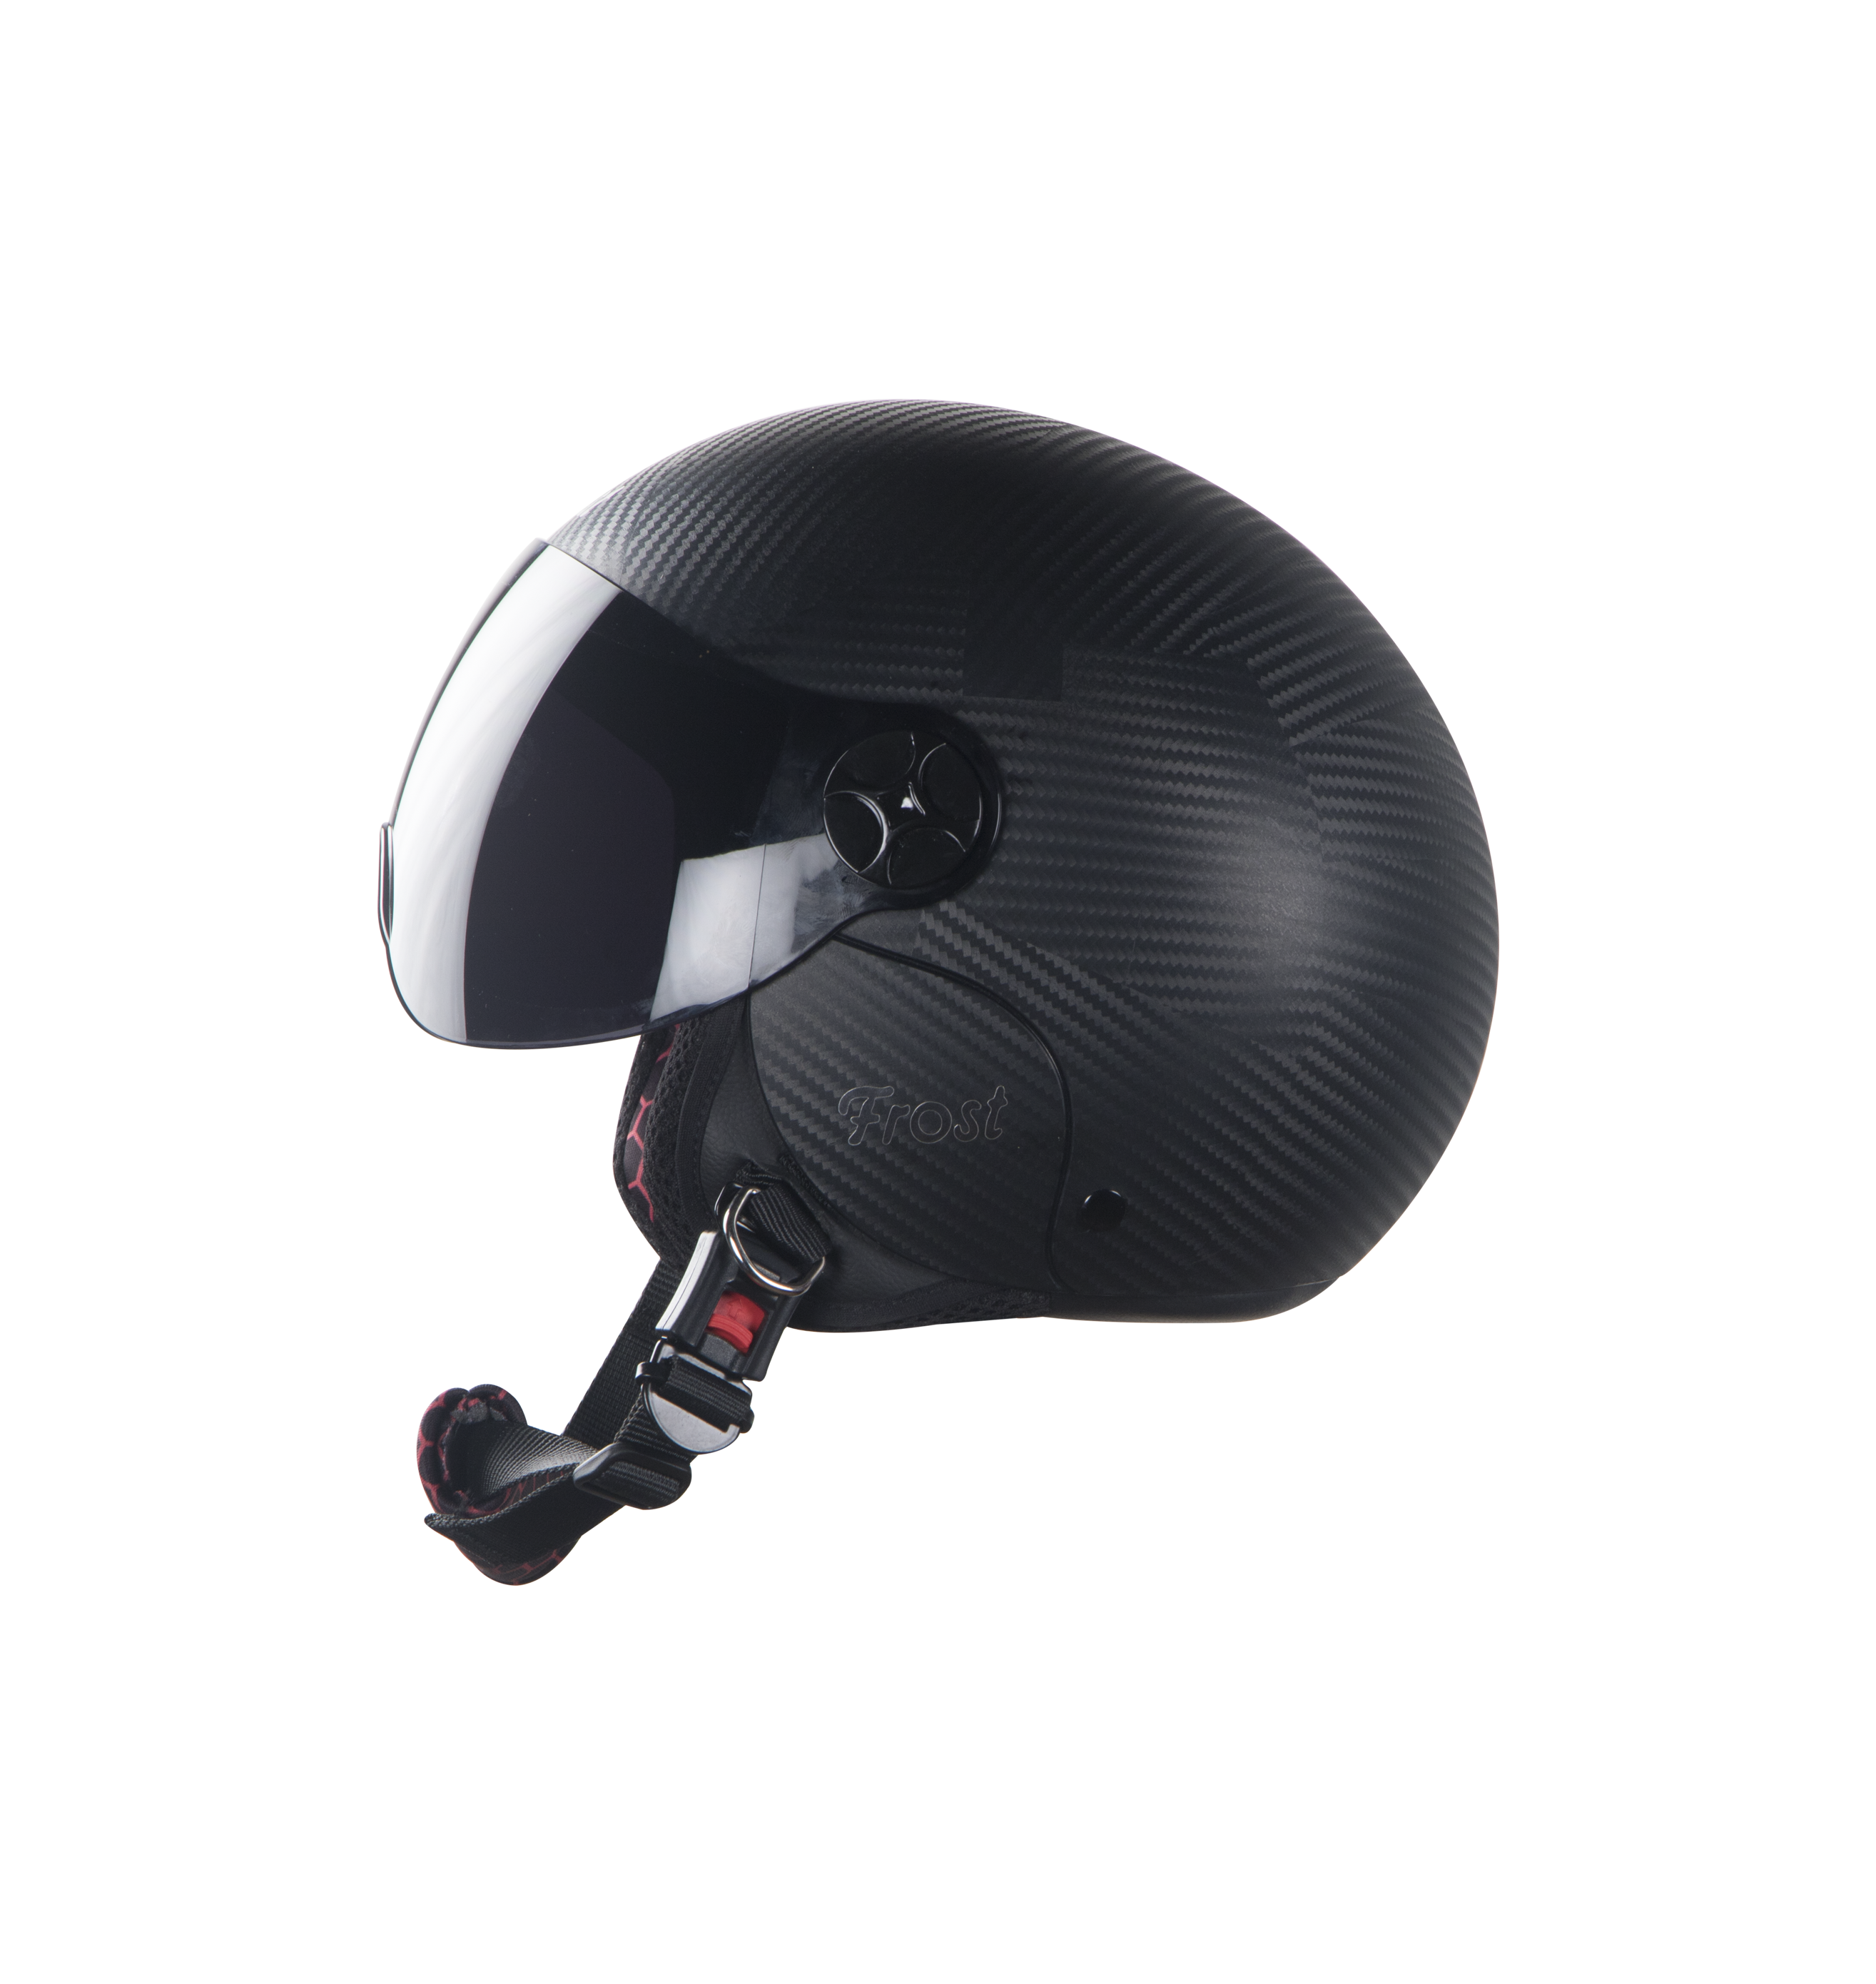 SBH-16 Frost Dashing Black ( For Girls)( Fitted With Clear Visor Extra Smoke Visor Free)